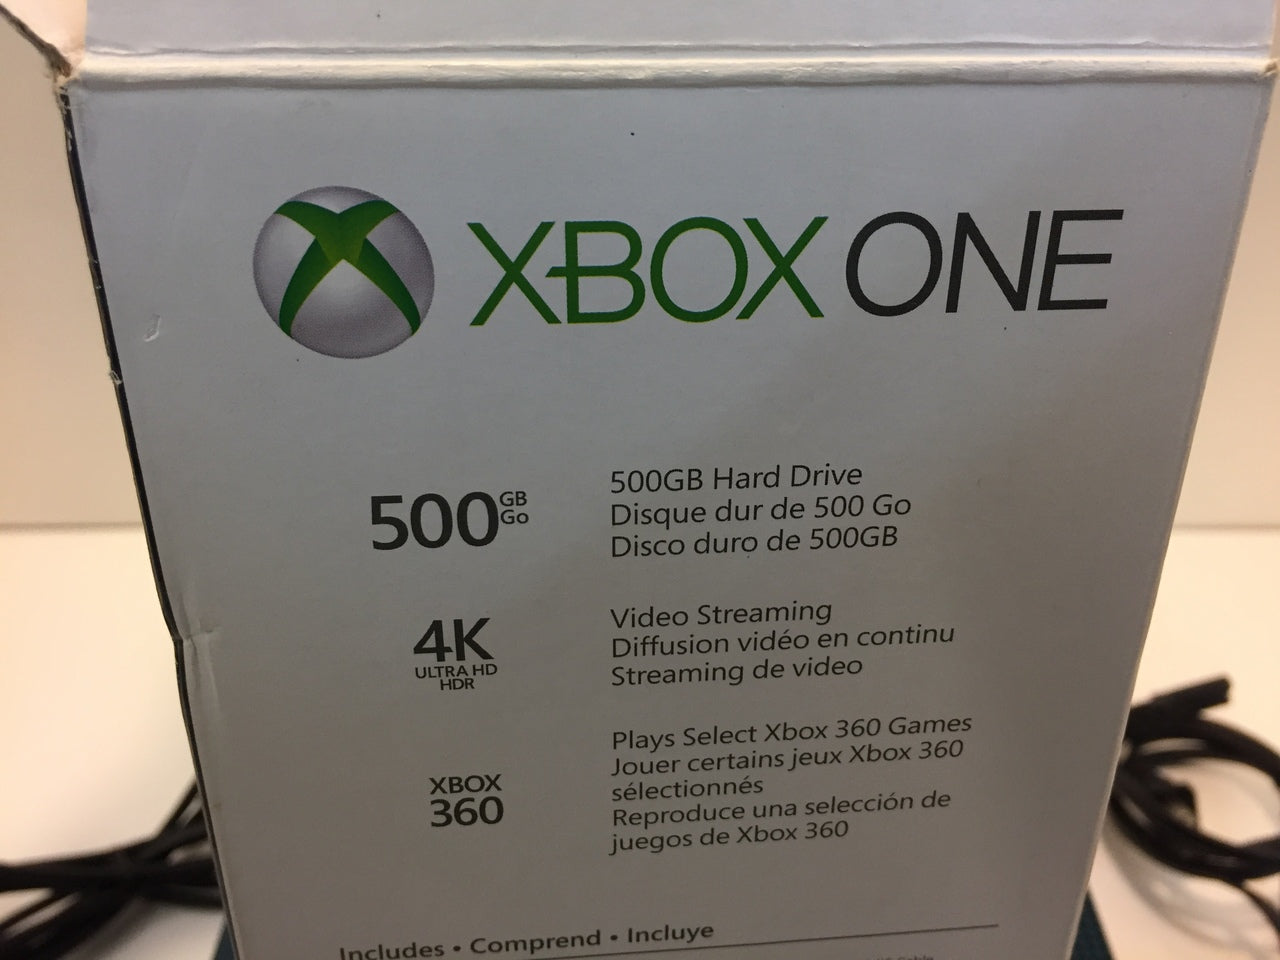 Microsoft Xbox One 500GB White Console - Gears of War: Special